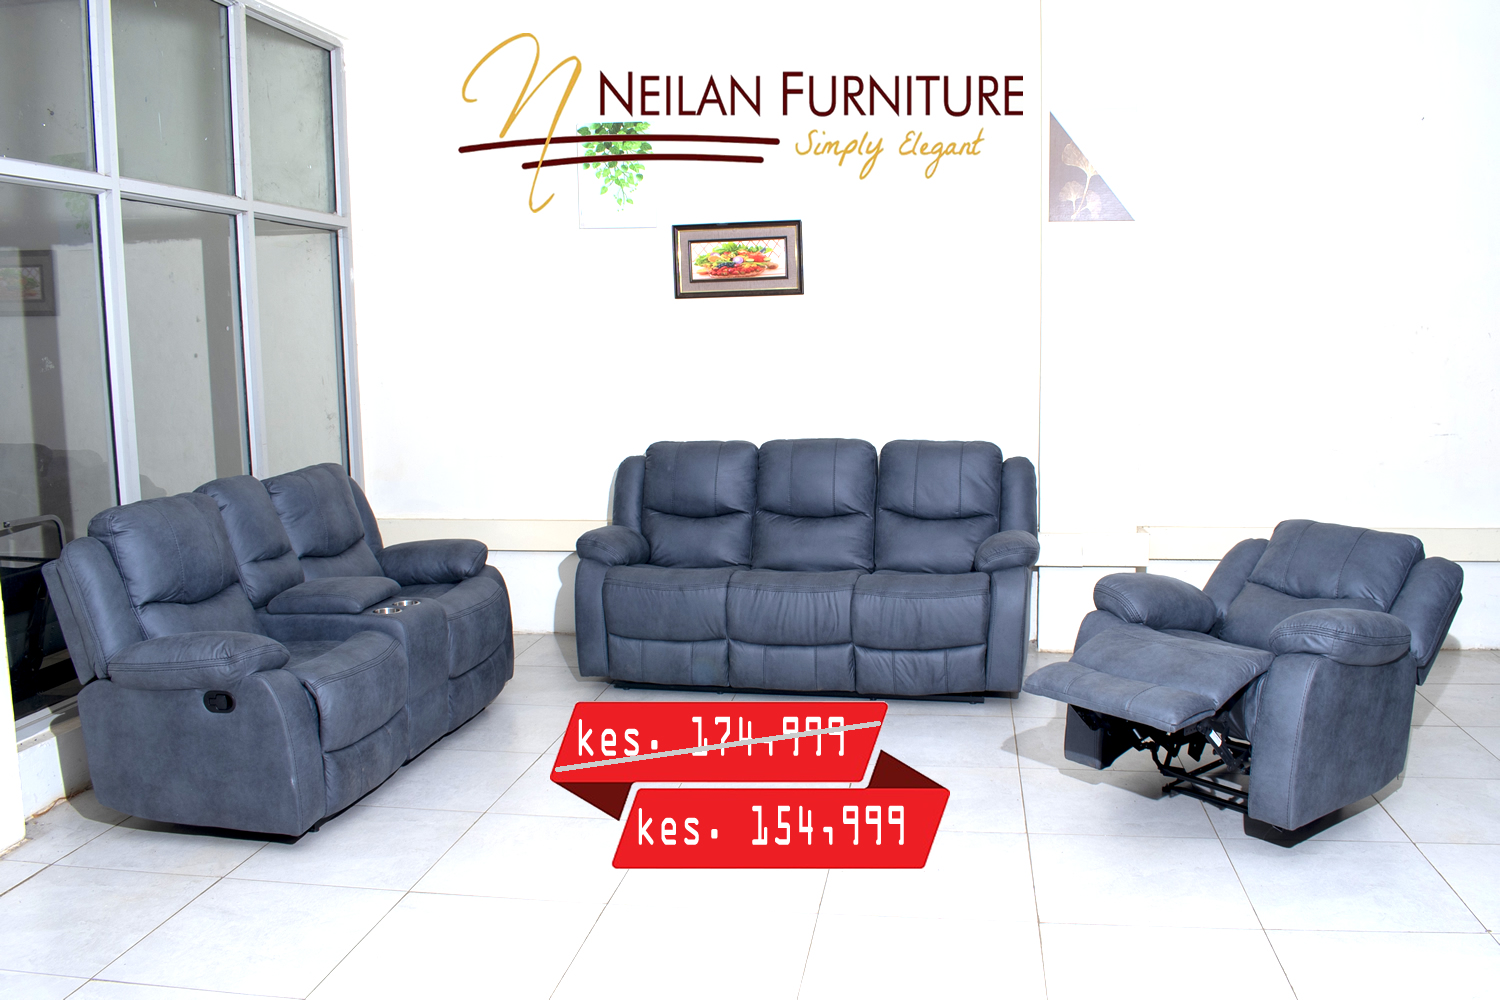 You are currently viewing Neilan Furniture Store in Kisumu, Megacity Plaza